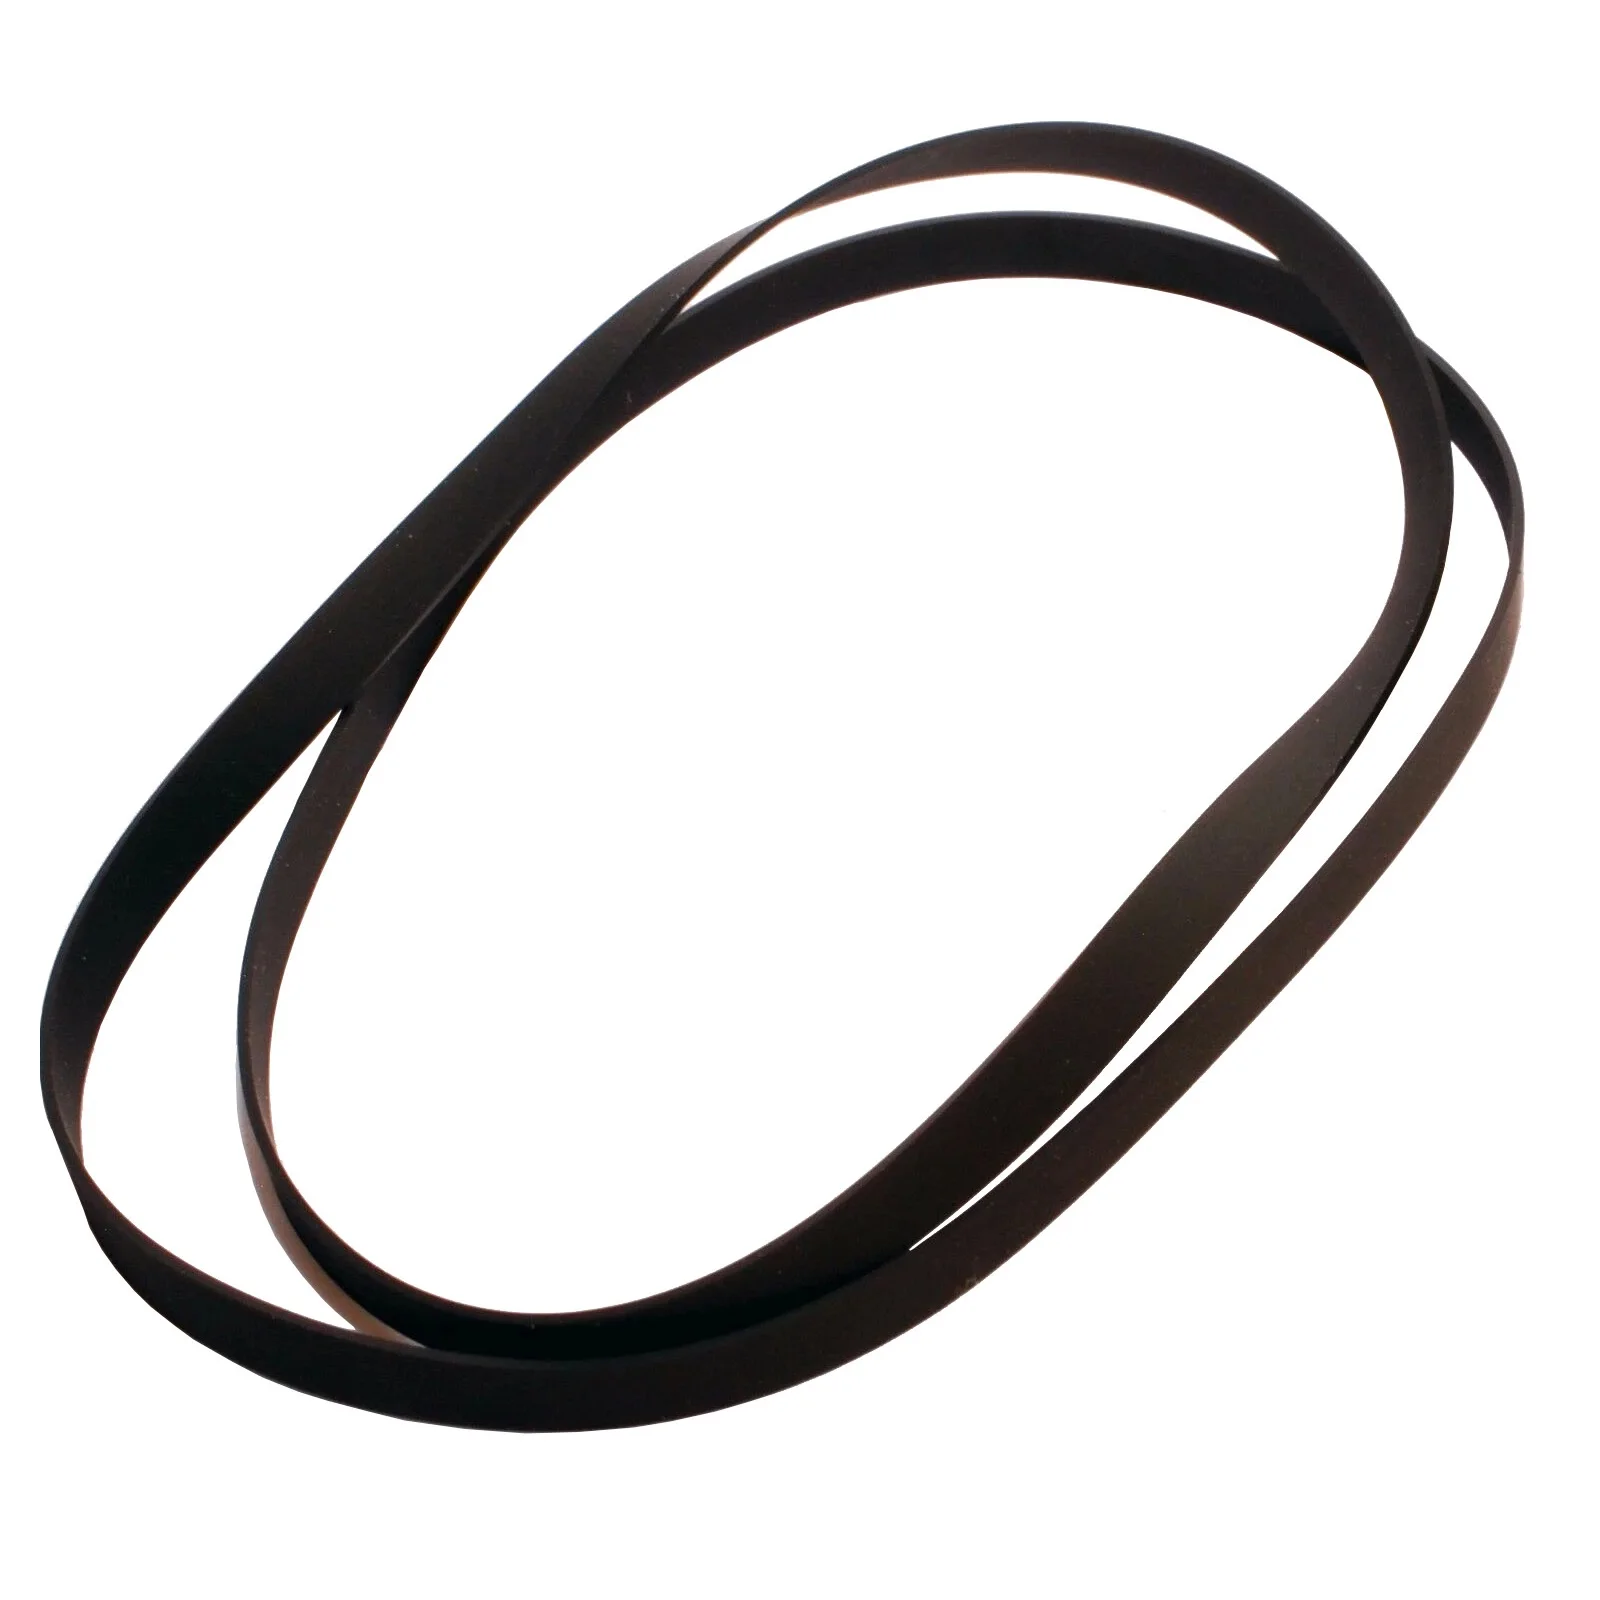 CAPSTAN BELT FOR TEAC REEL TO REEL A-3300-10, A-3300-11, A-3300-12